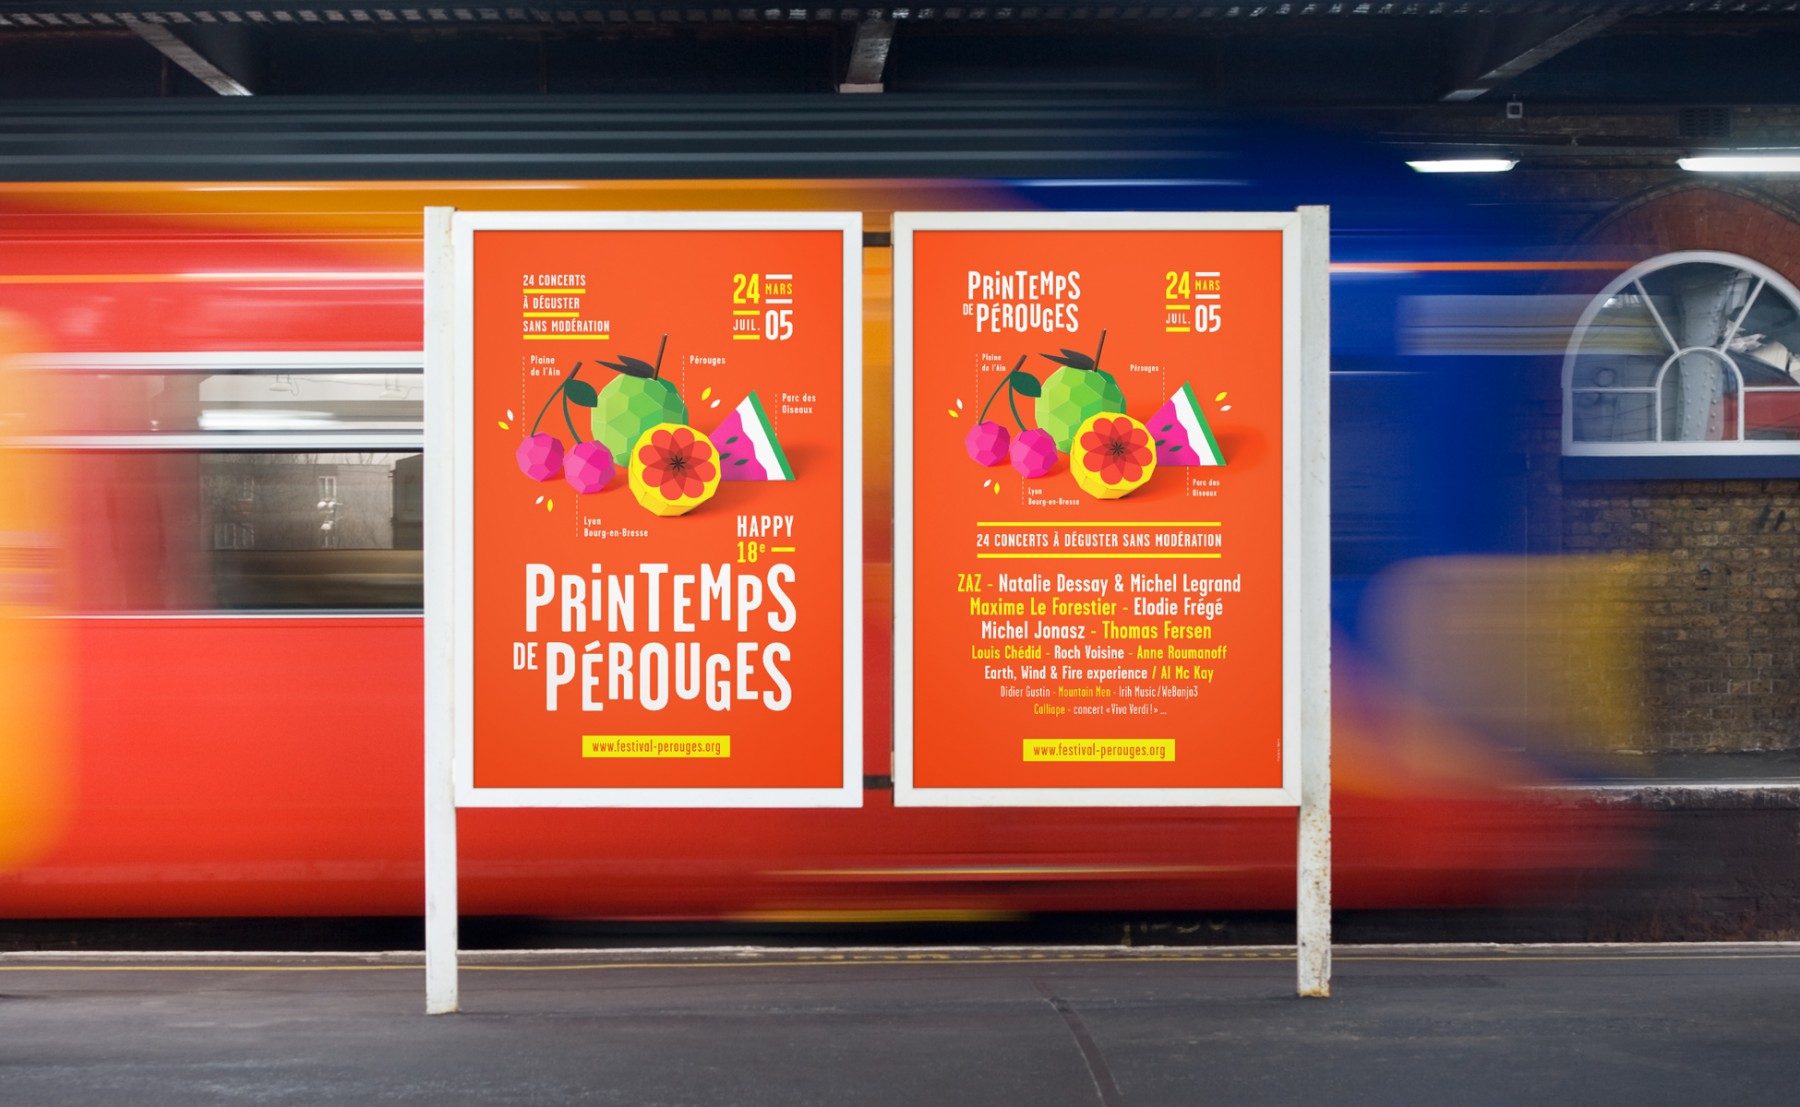 Poster-festival-perouges-subway